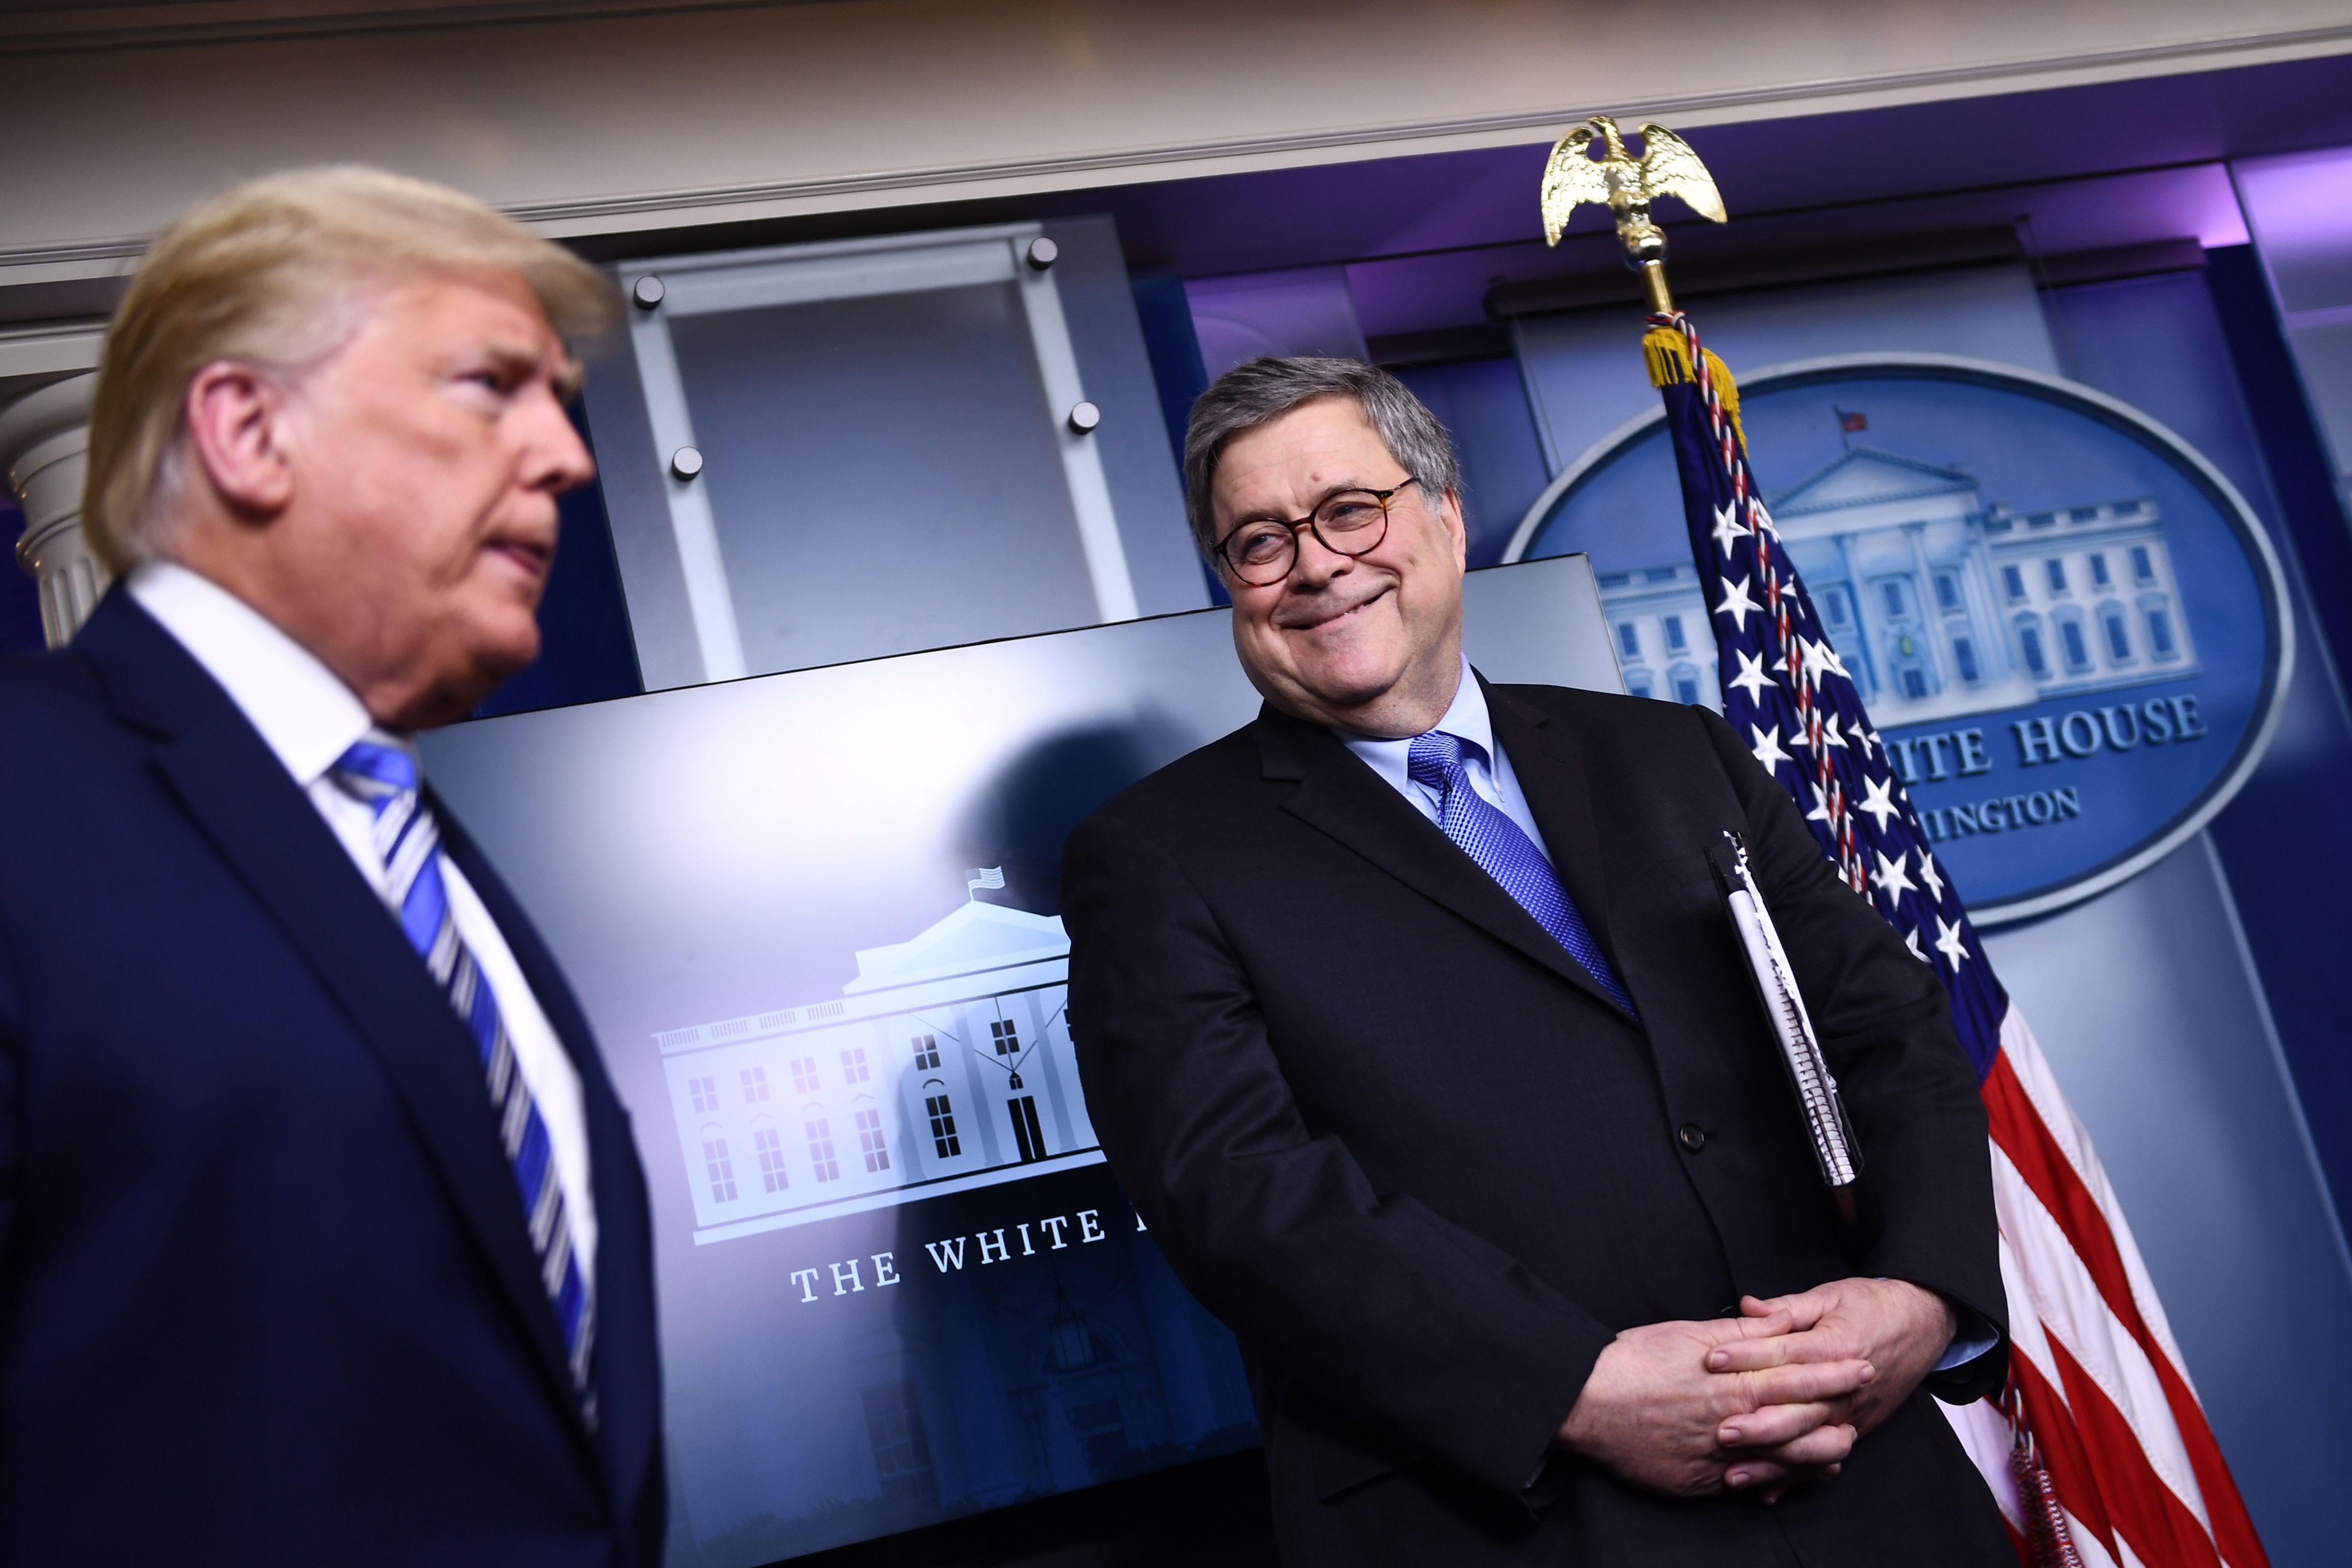 Barr smiles at Trump in the White House press room.